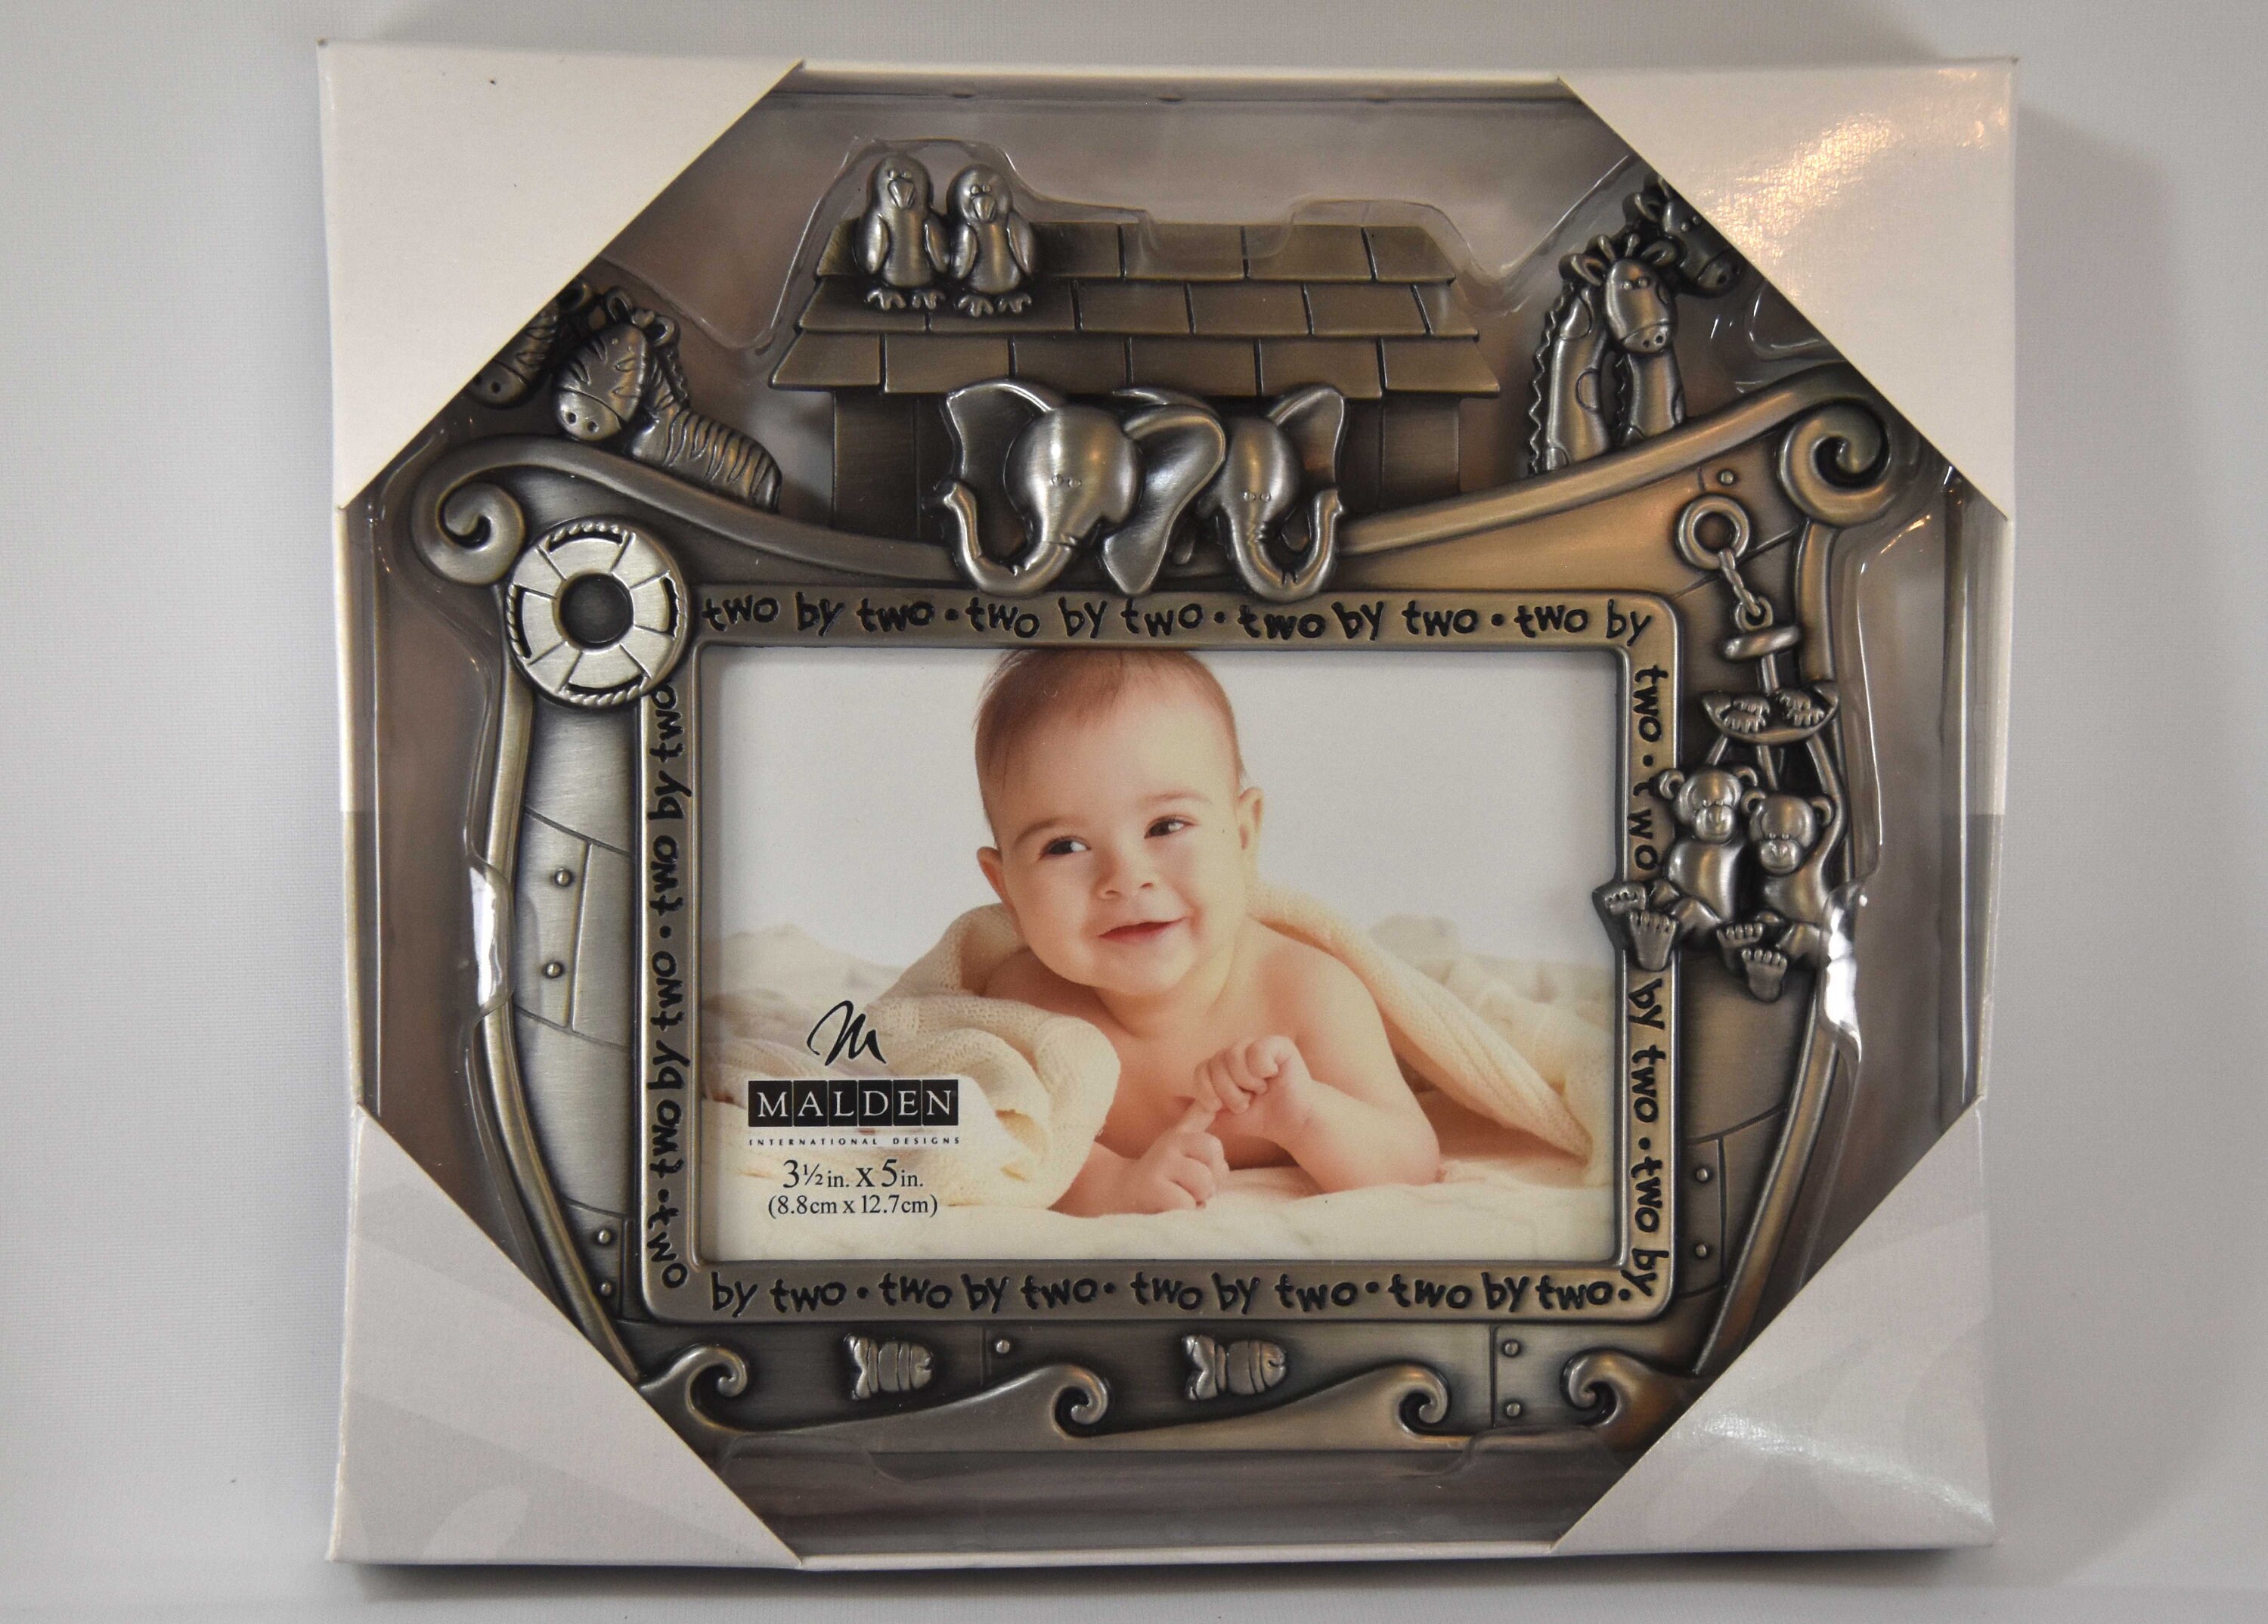 Malden International Designs 4x6 Family Picture Frame Family Knows You The  Best & Loves You The Most White MDF Wood Frame Routed Gray MDF Wood Base